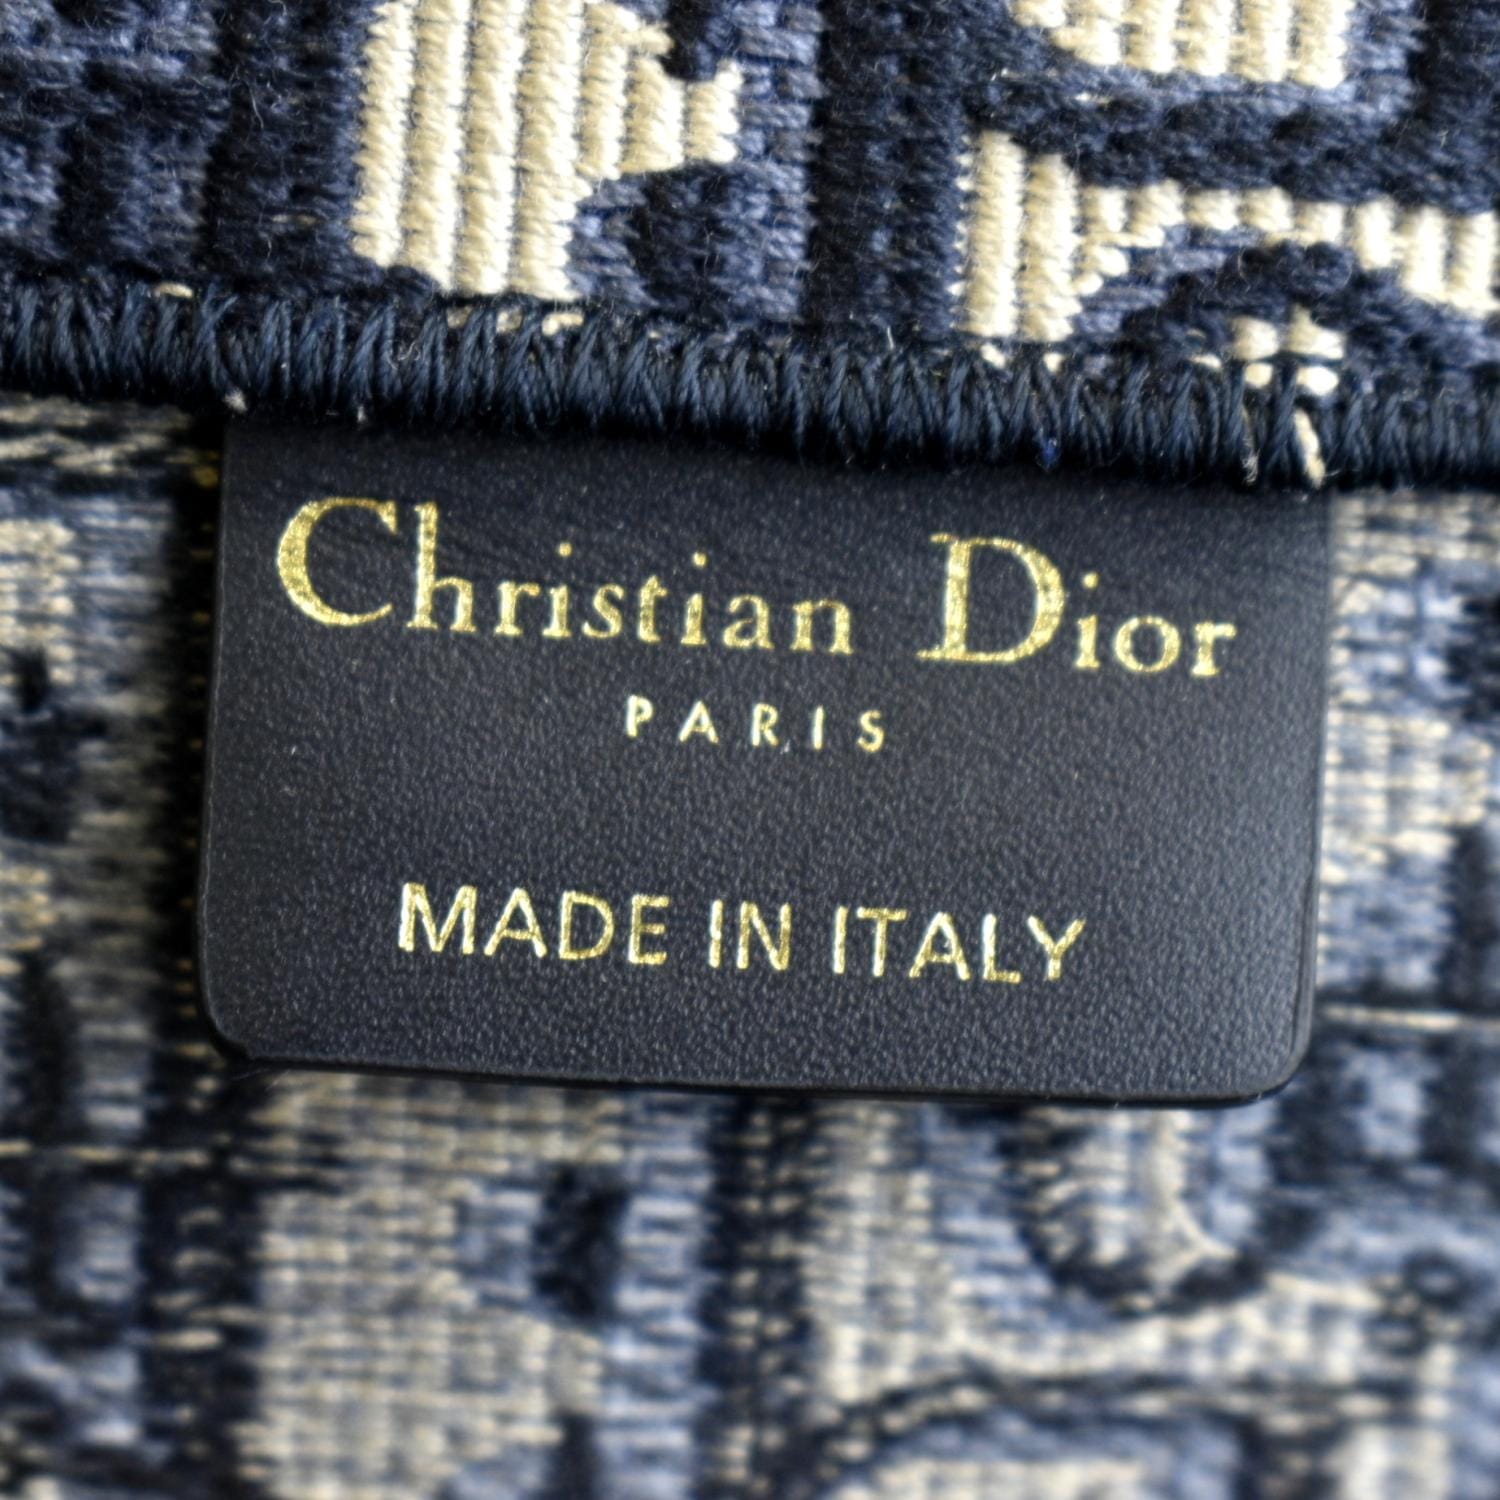 Christian Dior Large Book Oblique Embroidered Tote Bag